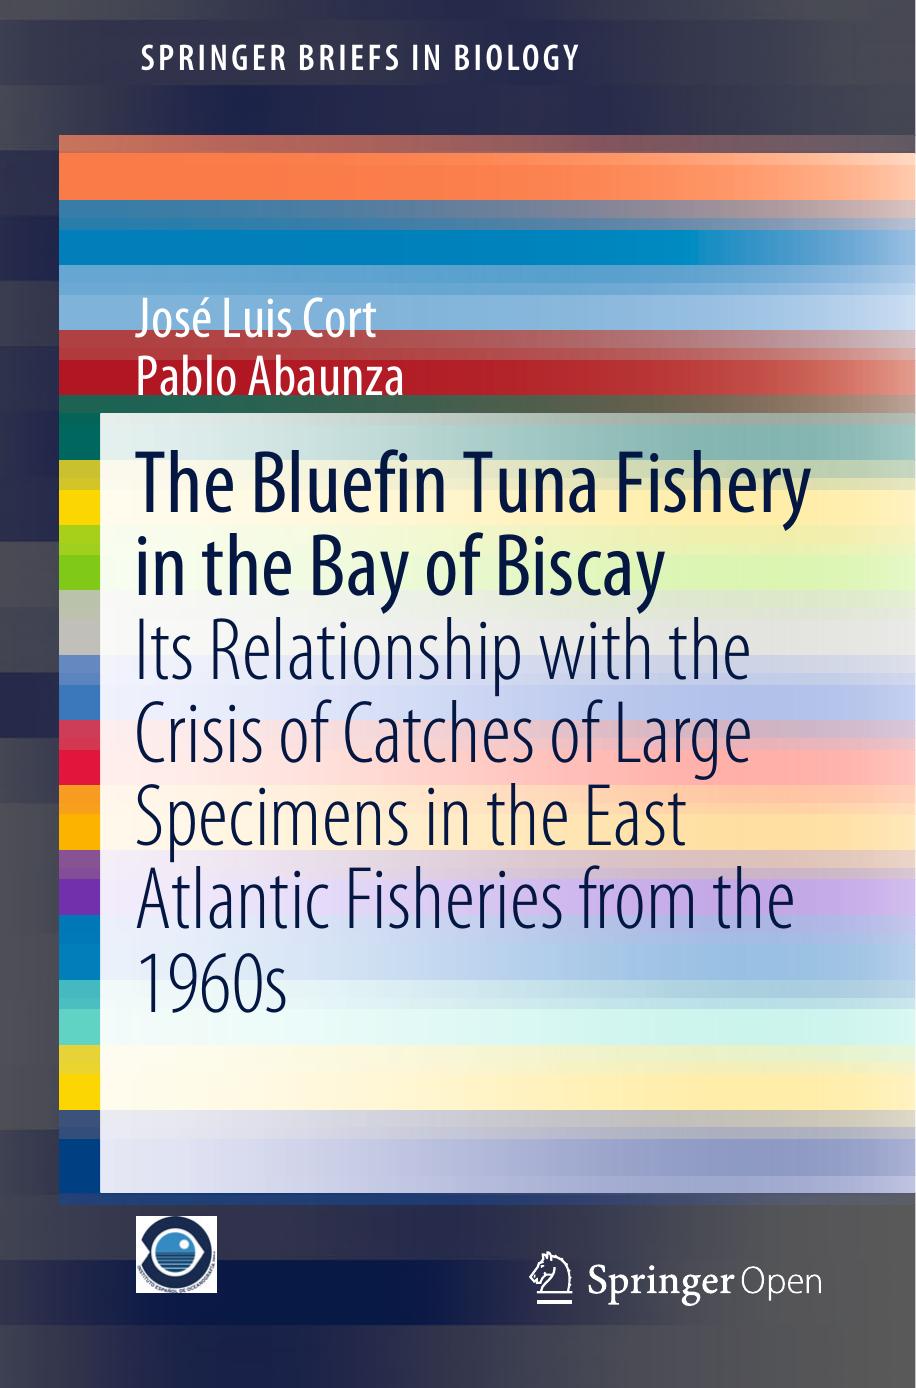 The Bluefin Tuna Fishery in the Bay of Biscay by José Luis Cort & Pablo Abaunza